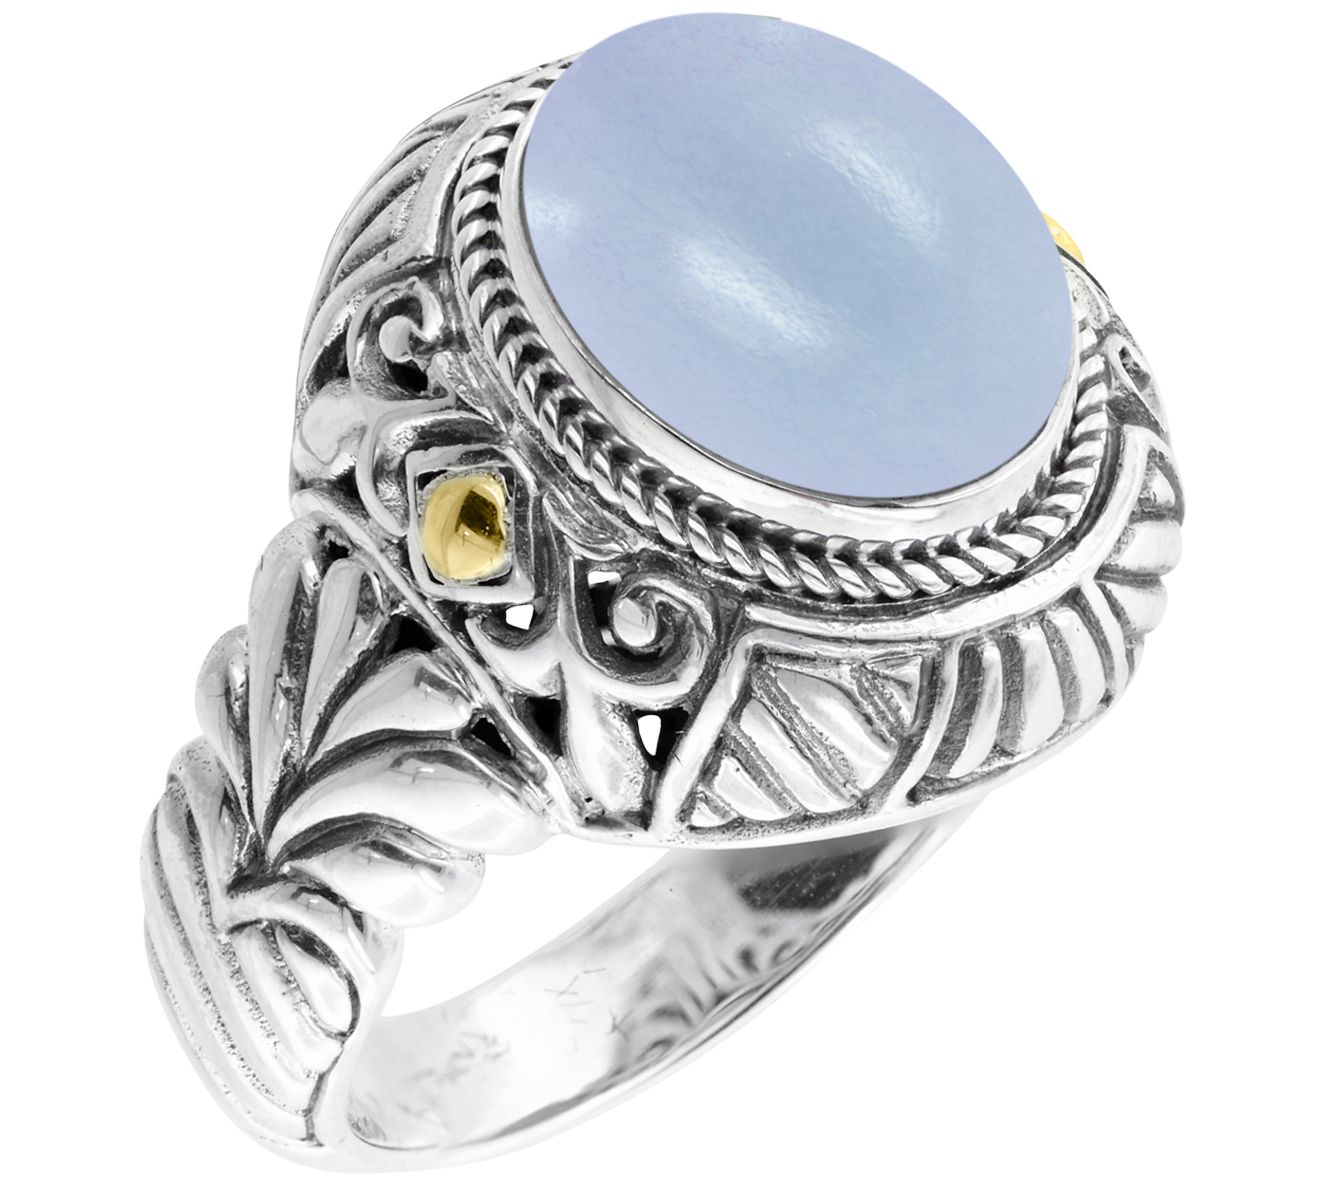 Artisan Crafted Sterling Silver Quartzite Ring - QVC.com